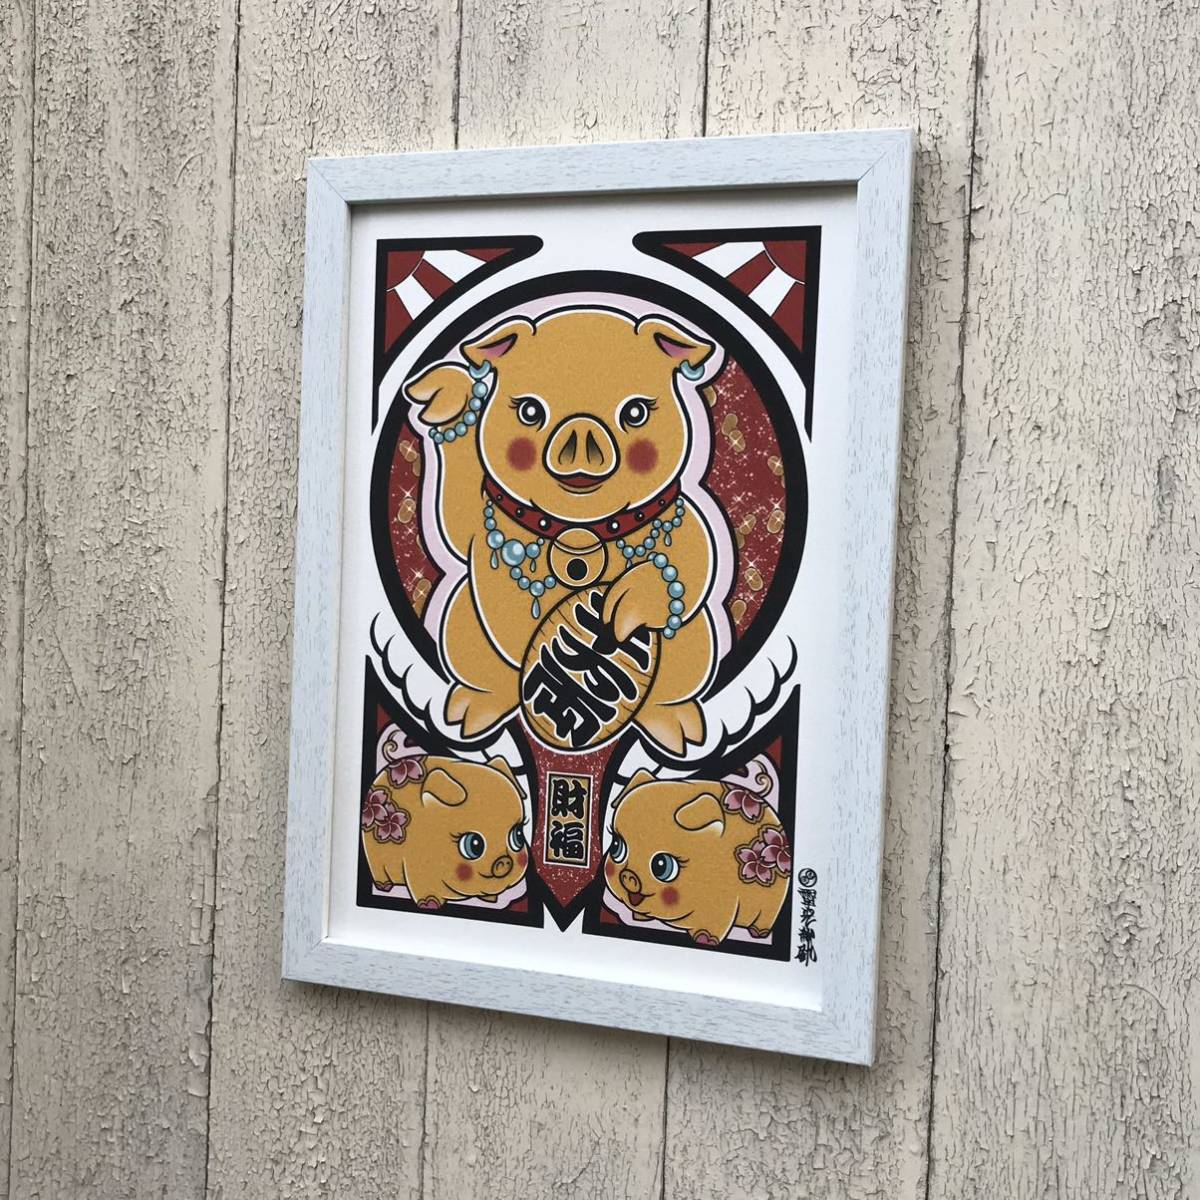  tail 9 better fortune illustration fortune . up gold color .. pig .. rise . luck fortune luck .. item white color frame A4 size frame attaching art frame amount 